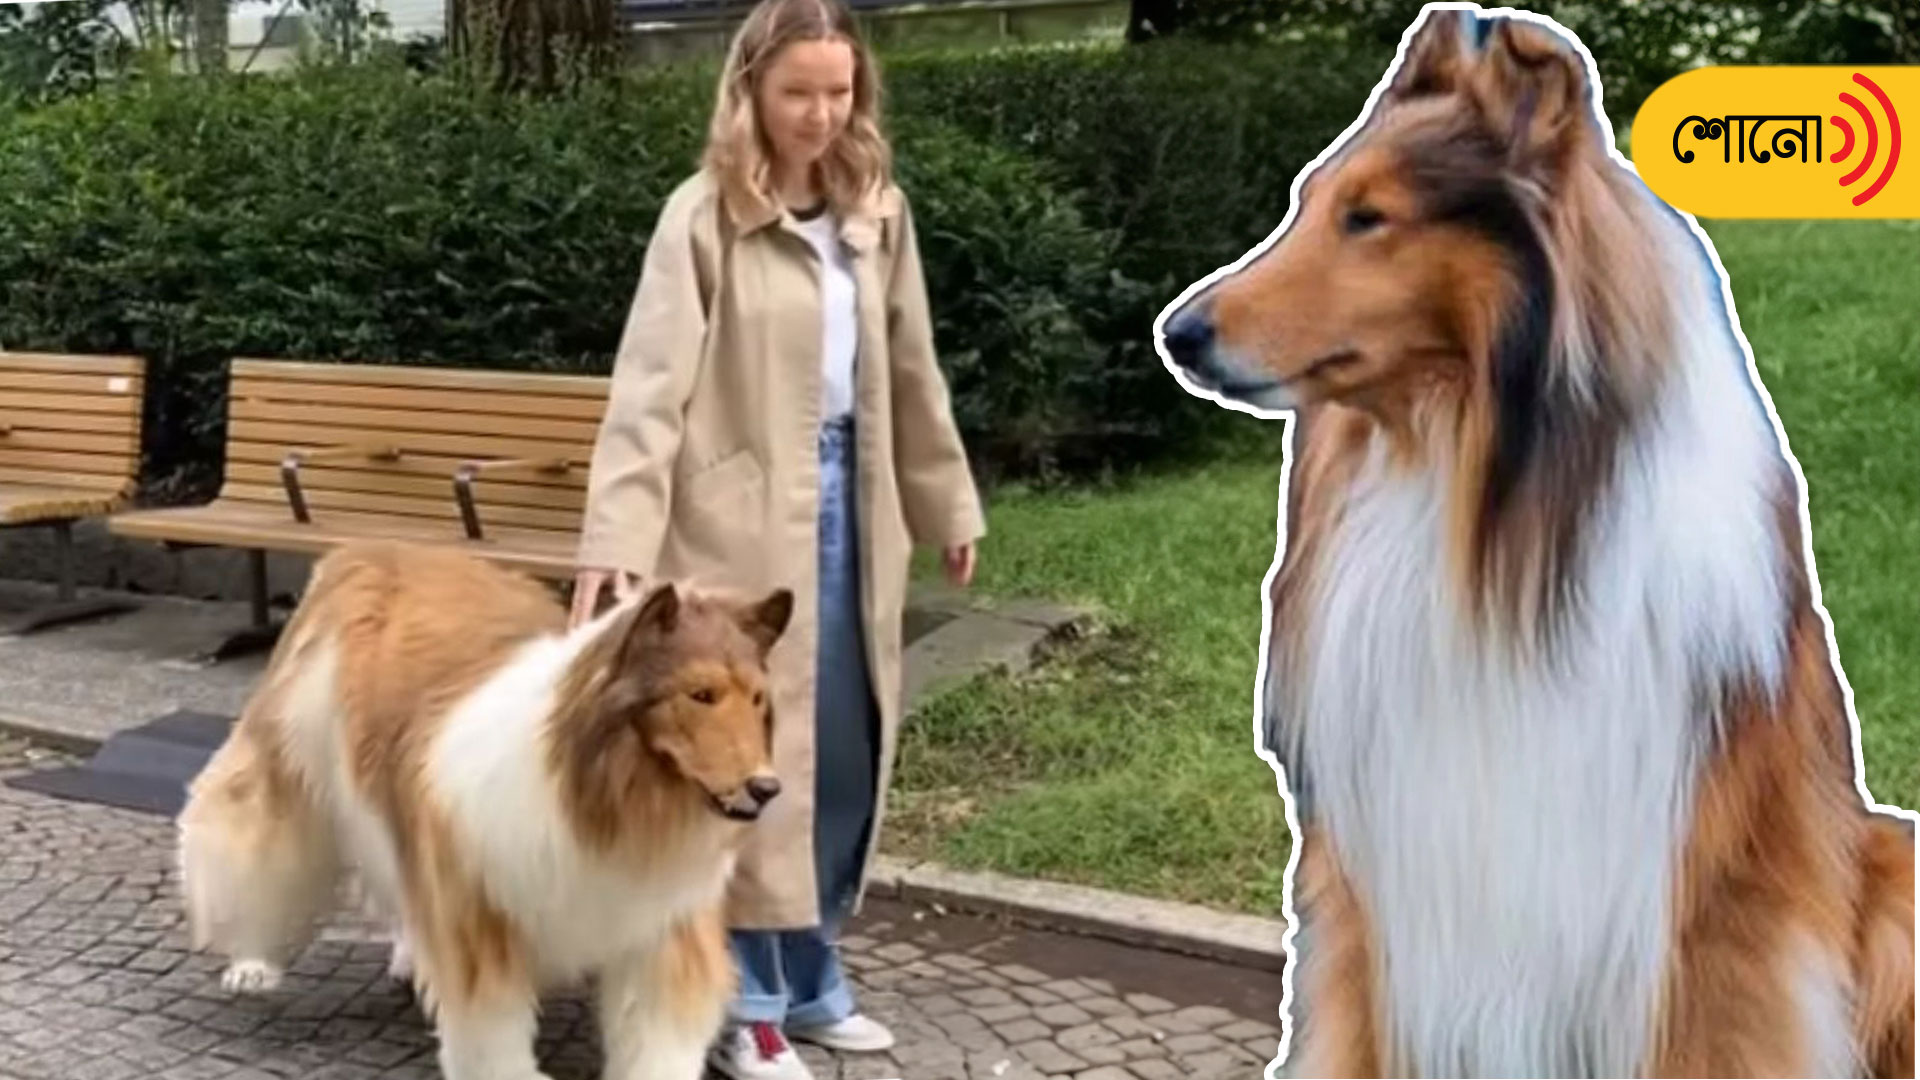 Japanese man who transforms into ‘human dog’ takes first walk in public